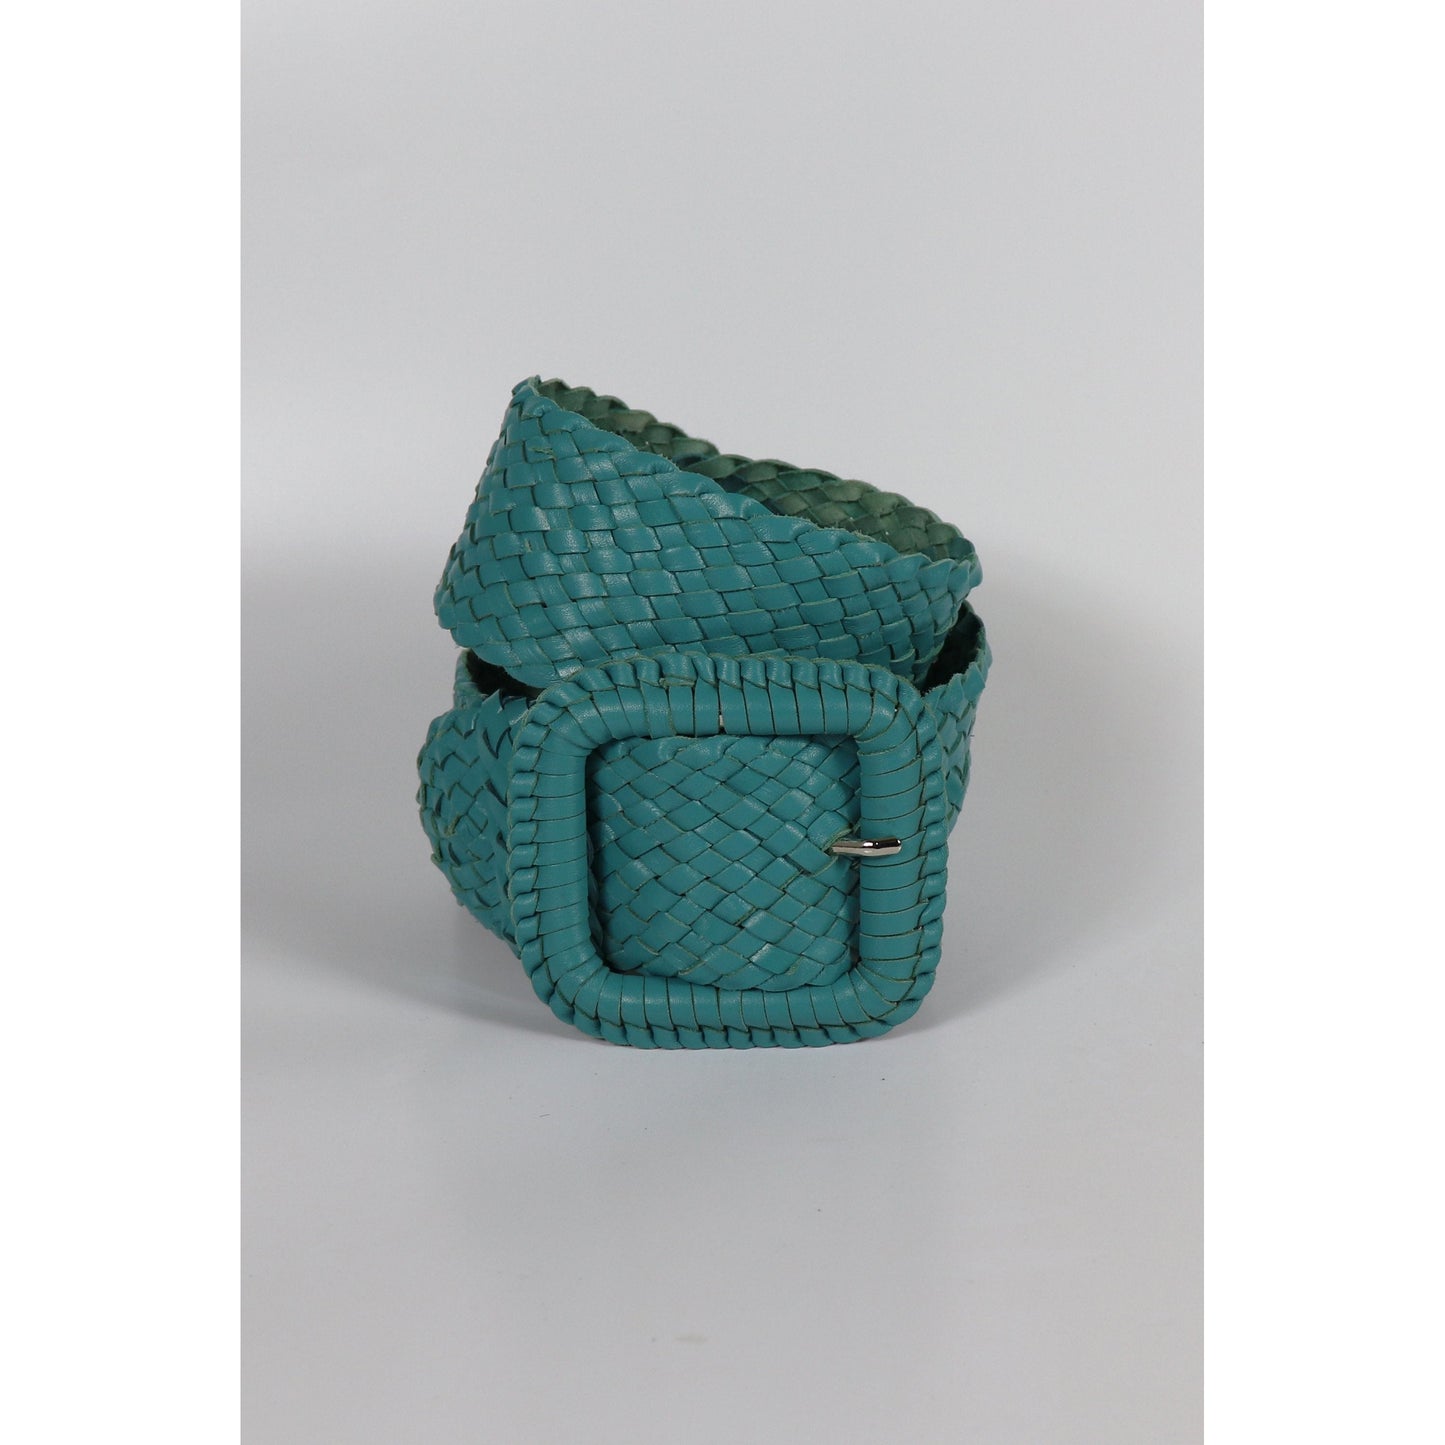 Turquoise woven leather wrist cuff.